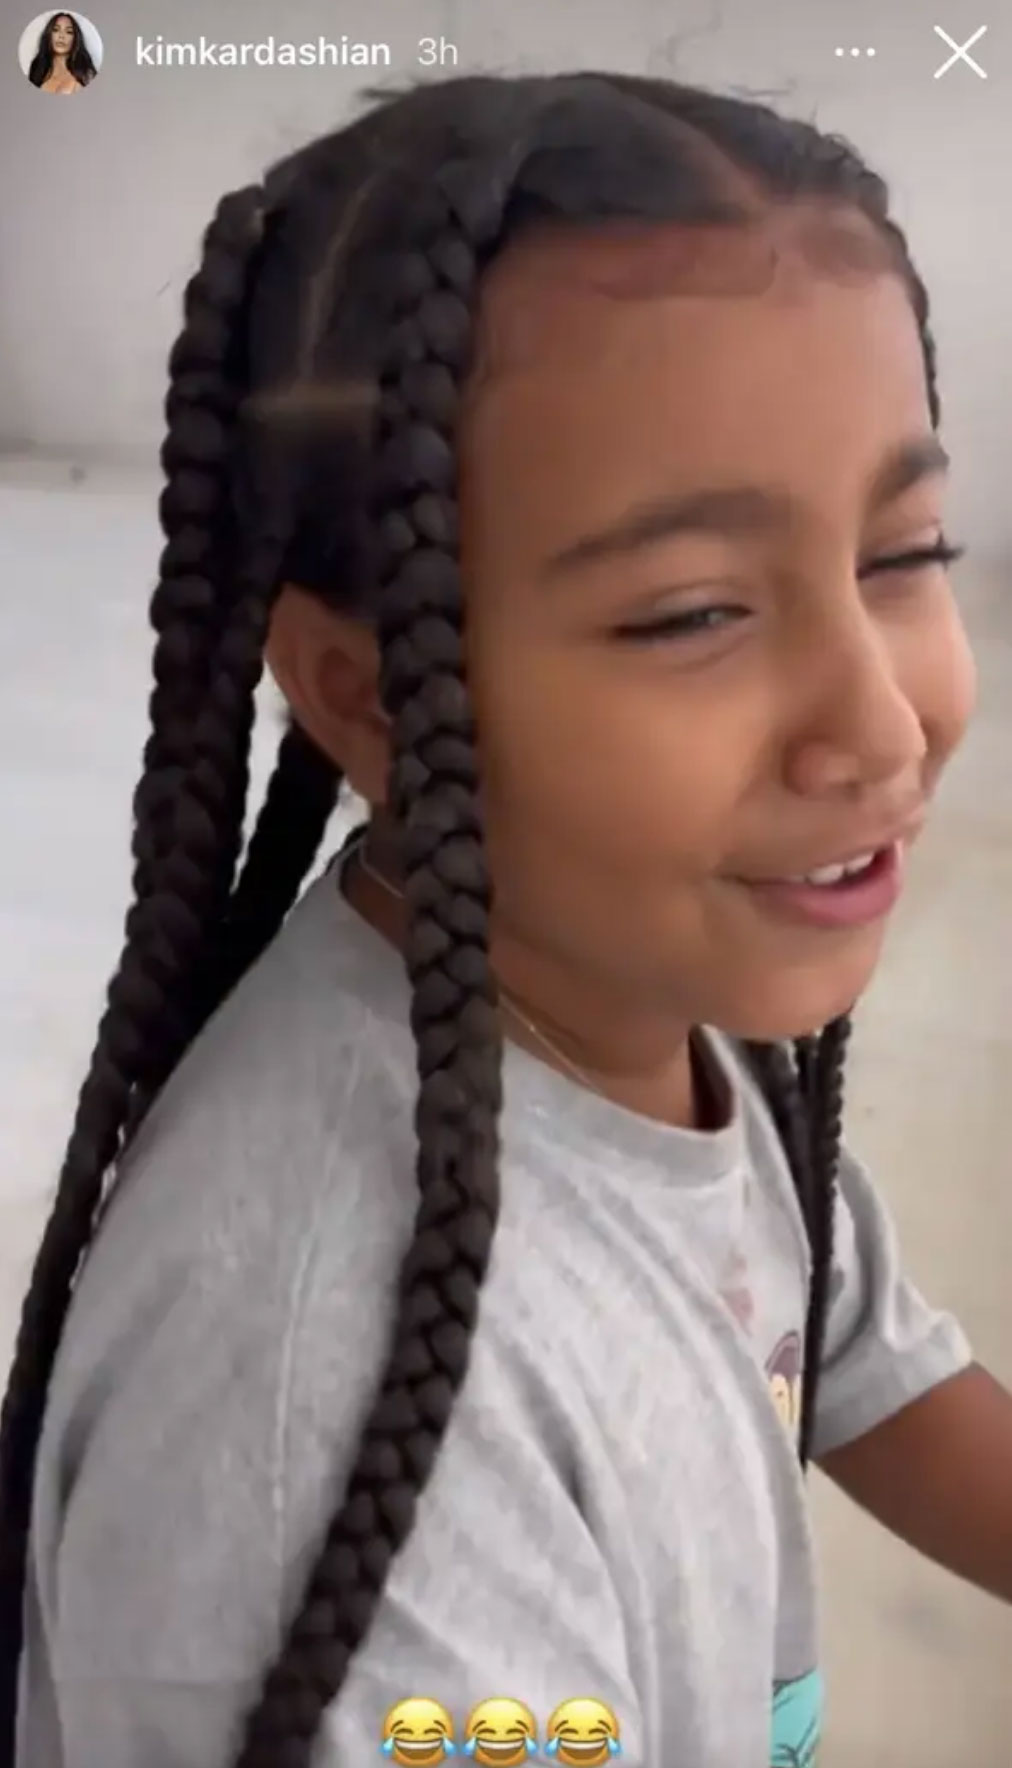 All the times Kim Kardashian’s daughter North, 9, mocked famous mom in hilarious videos